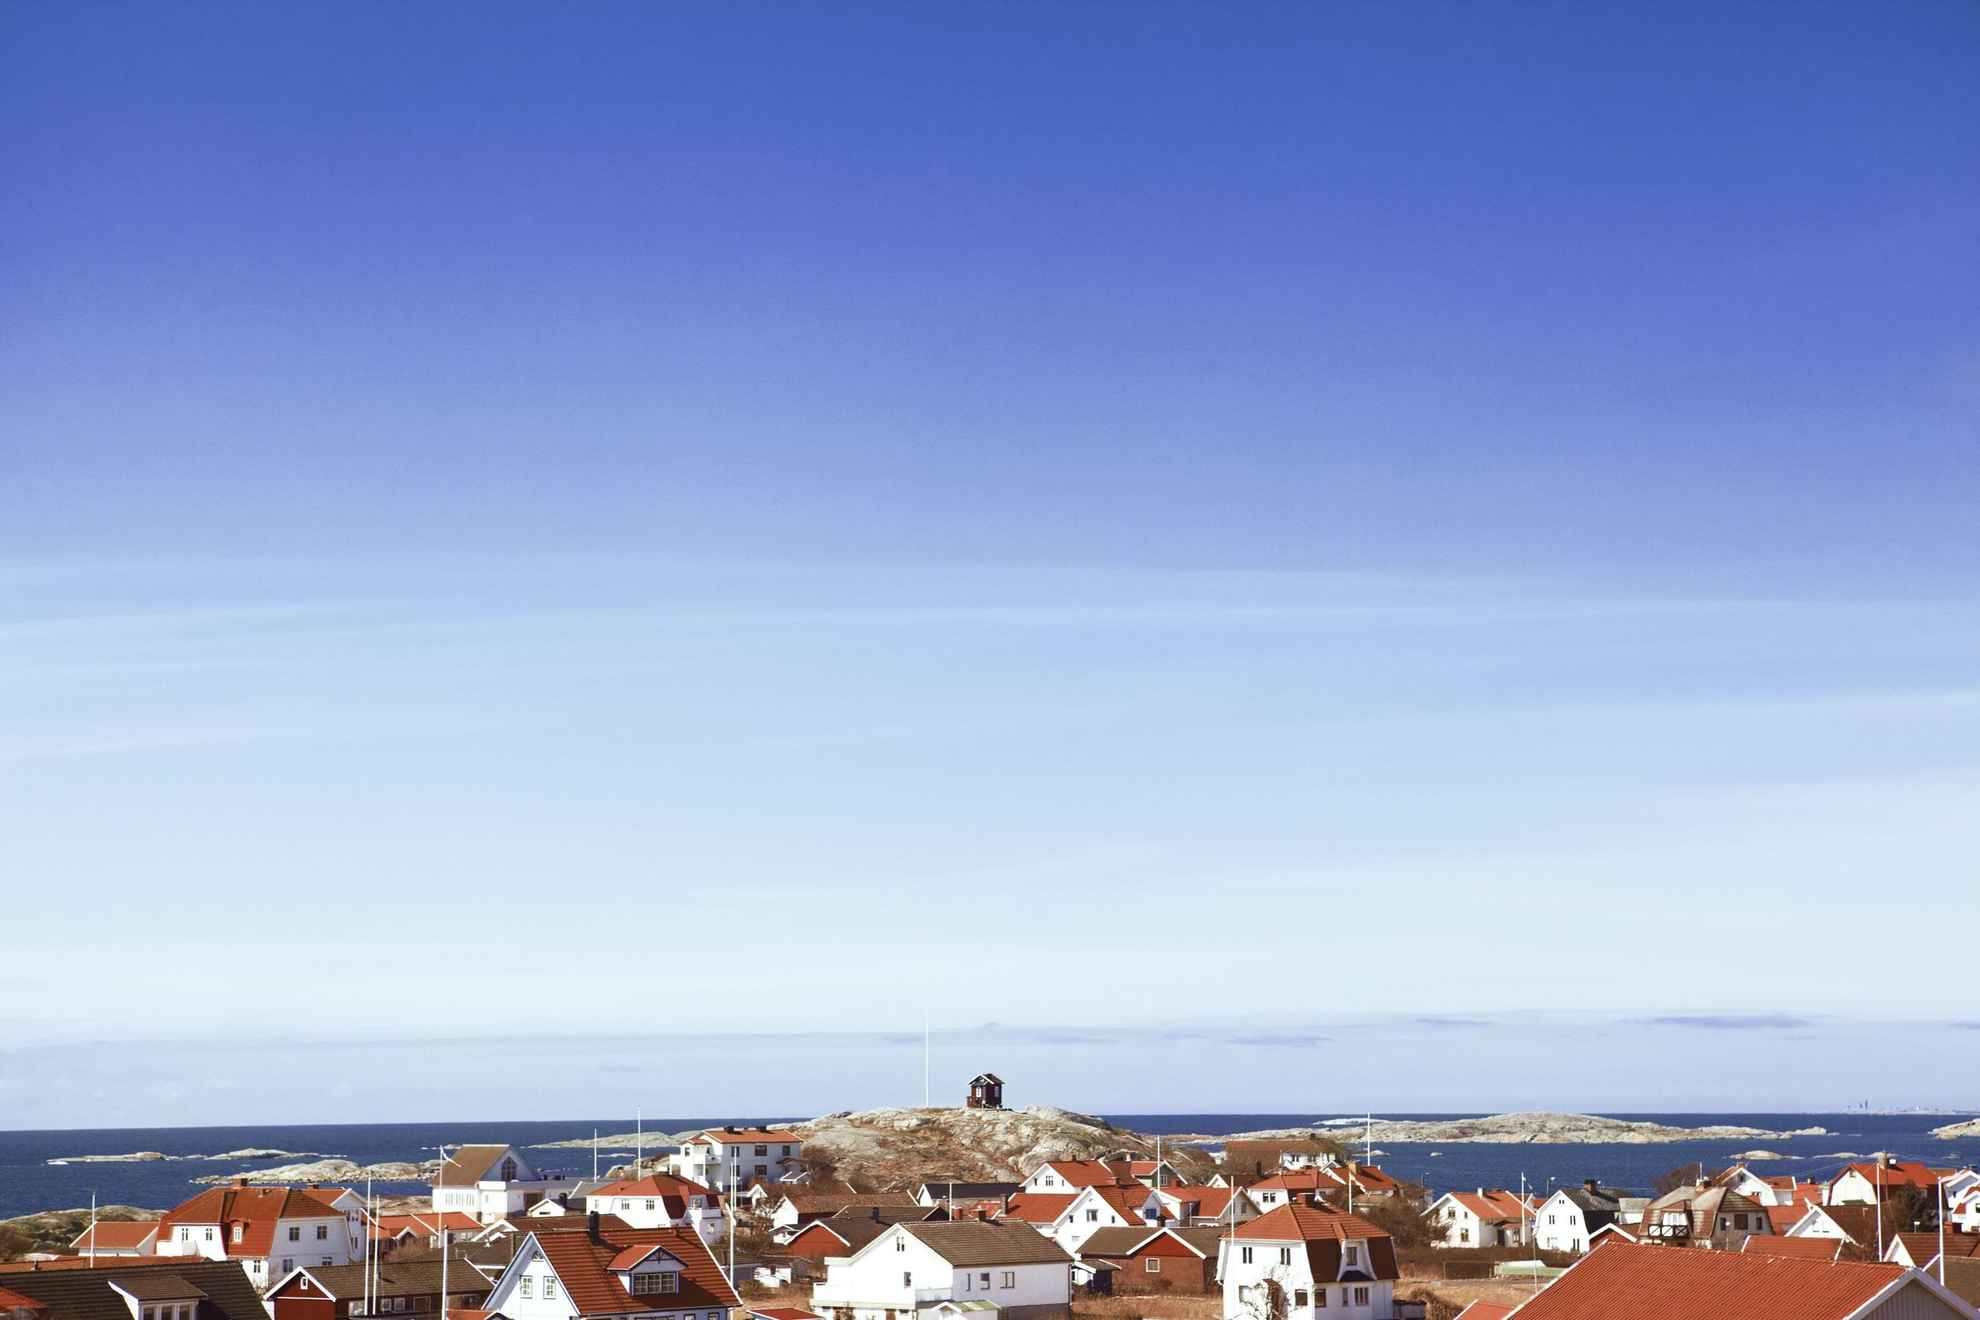 A view of white houses with red rooftops with the archipelago in the background.